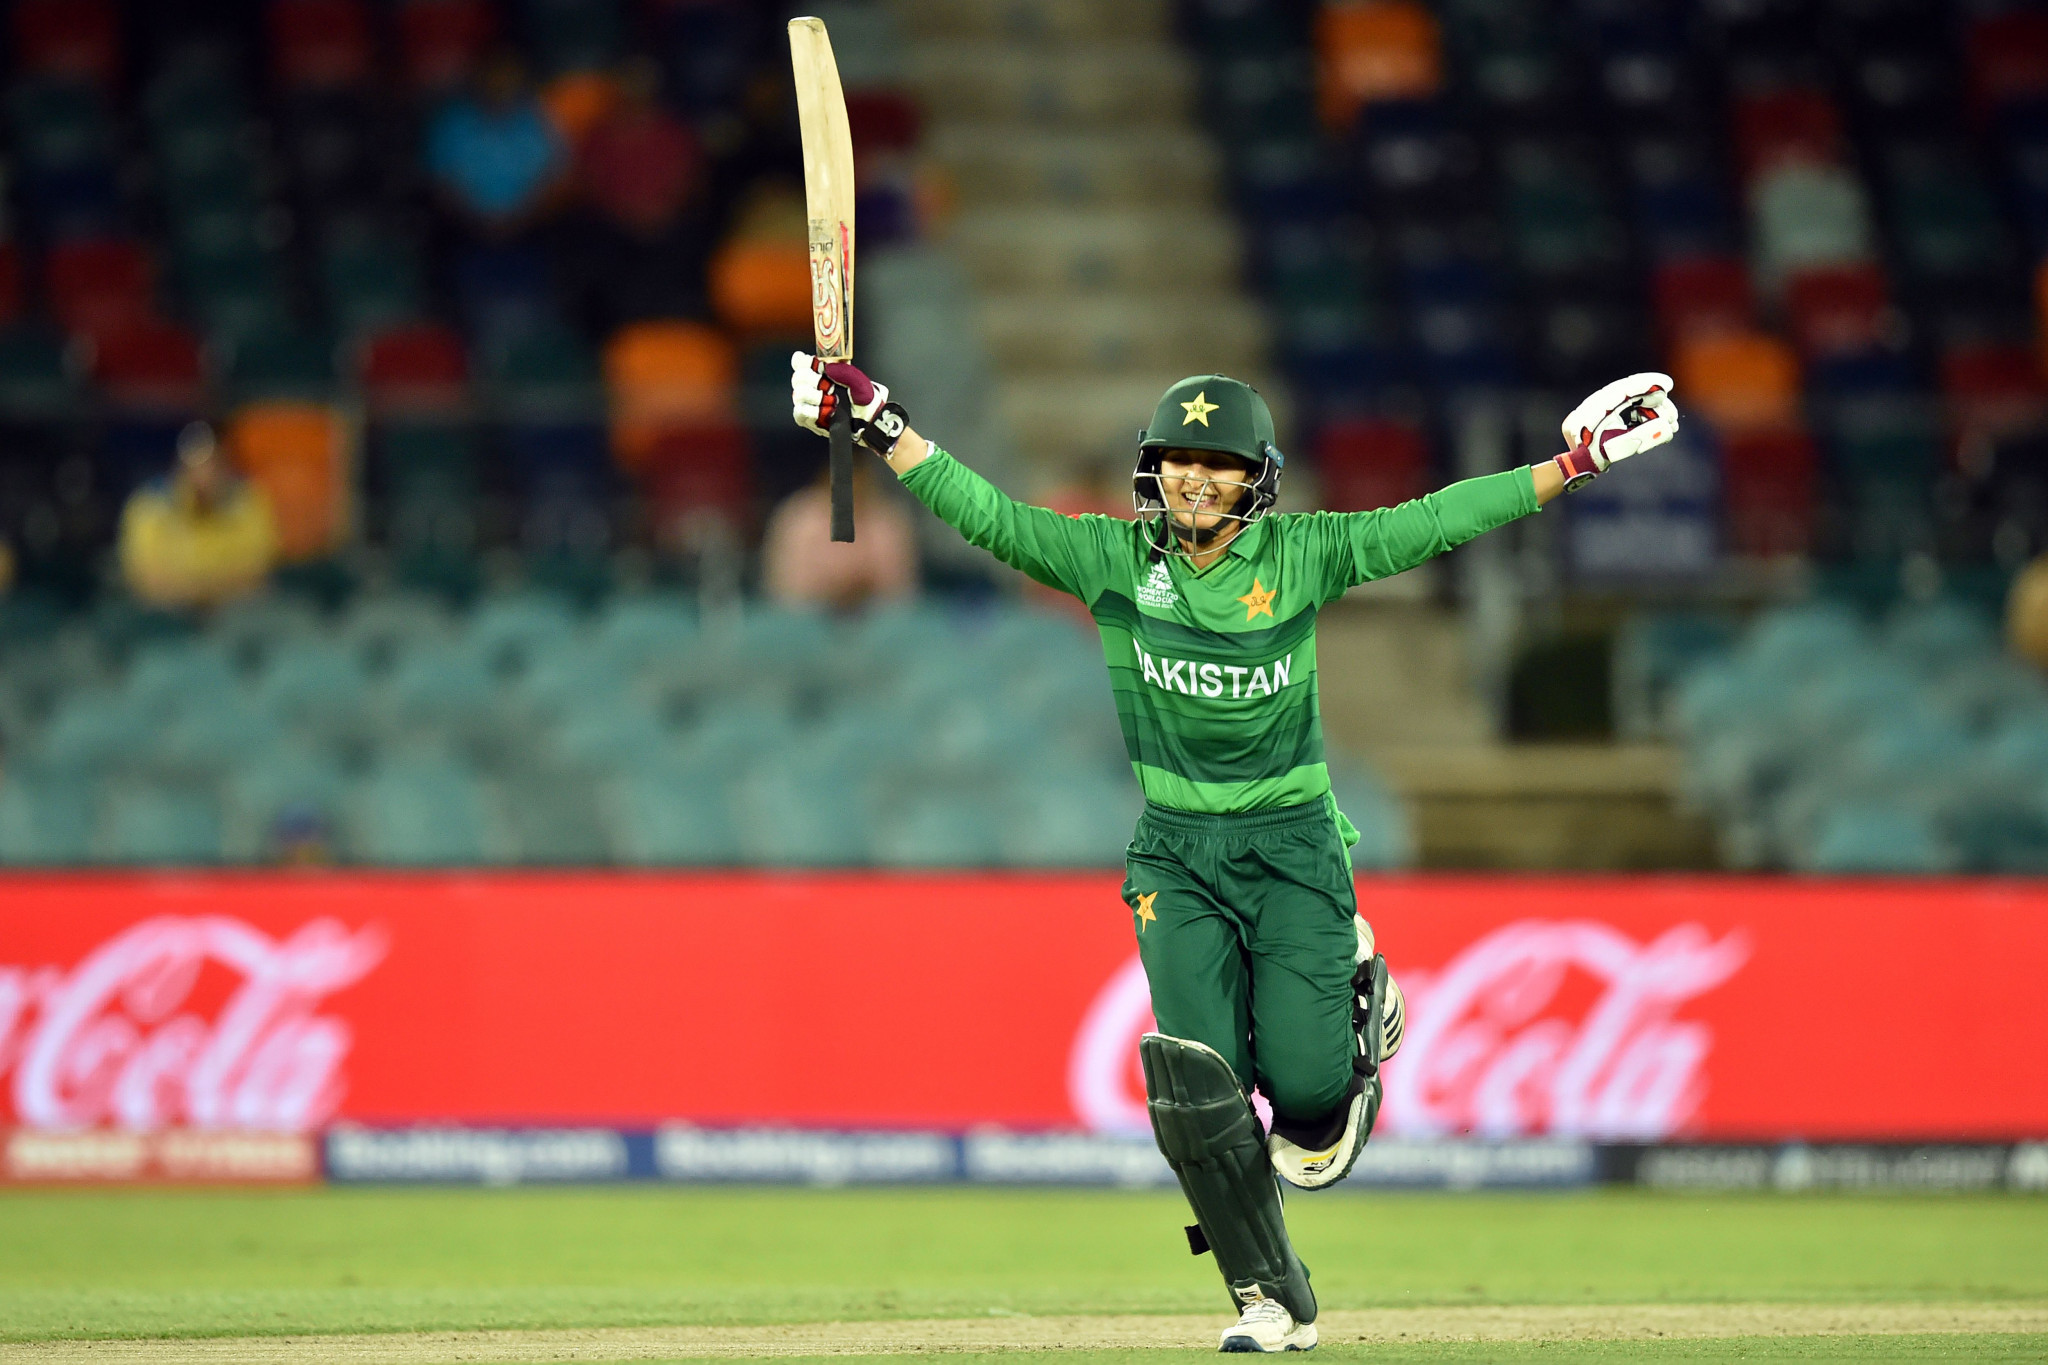 Pakistan's captain Bismah Maroof guided her side to victory over West Indies ©Getty Images